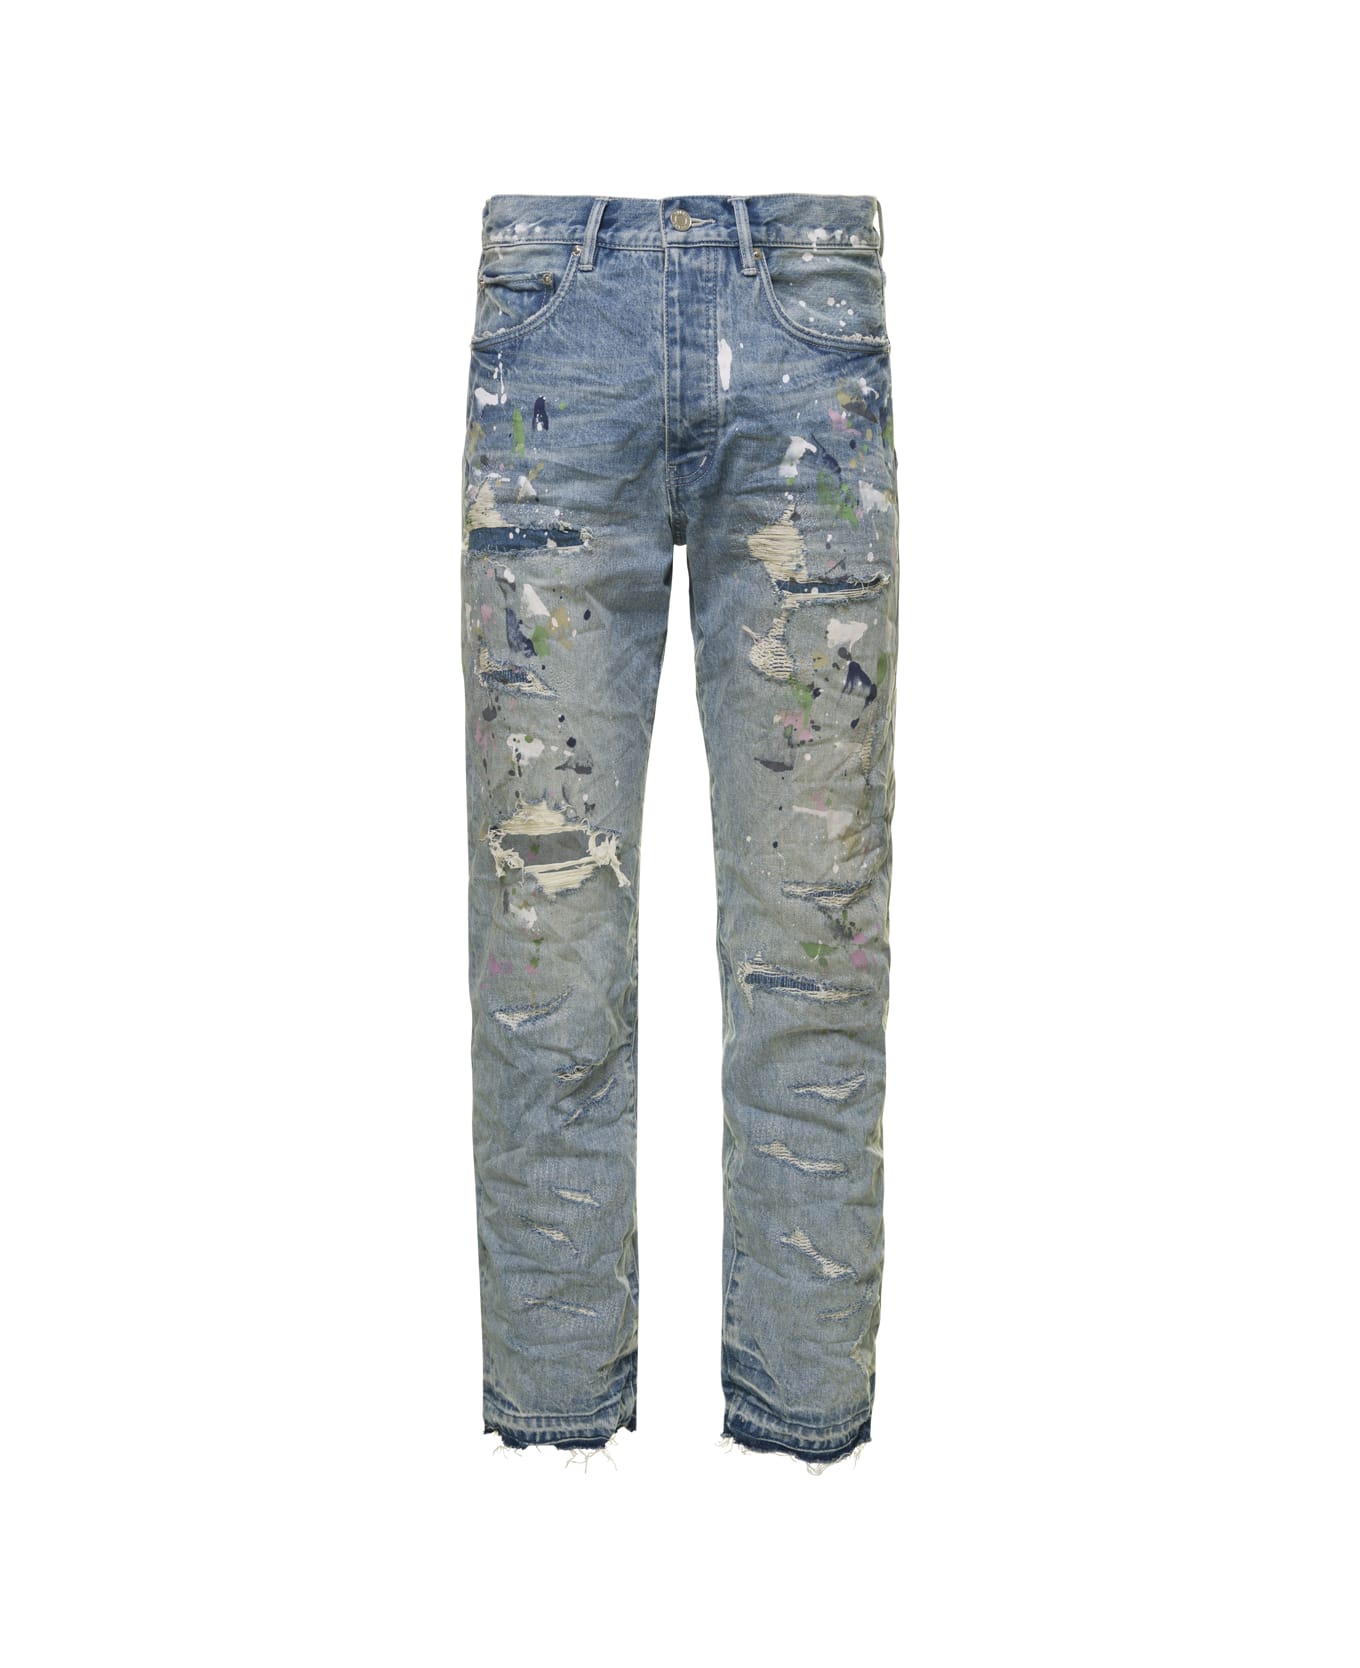 Purple Brand Light Blue Wrinkled Jeans With Rips And Paint Stains In Cotton Denim Man Purple Brand - Blu